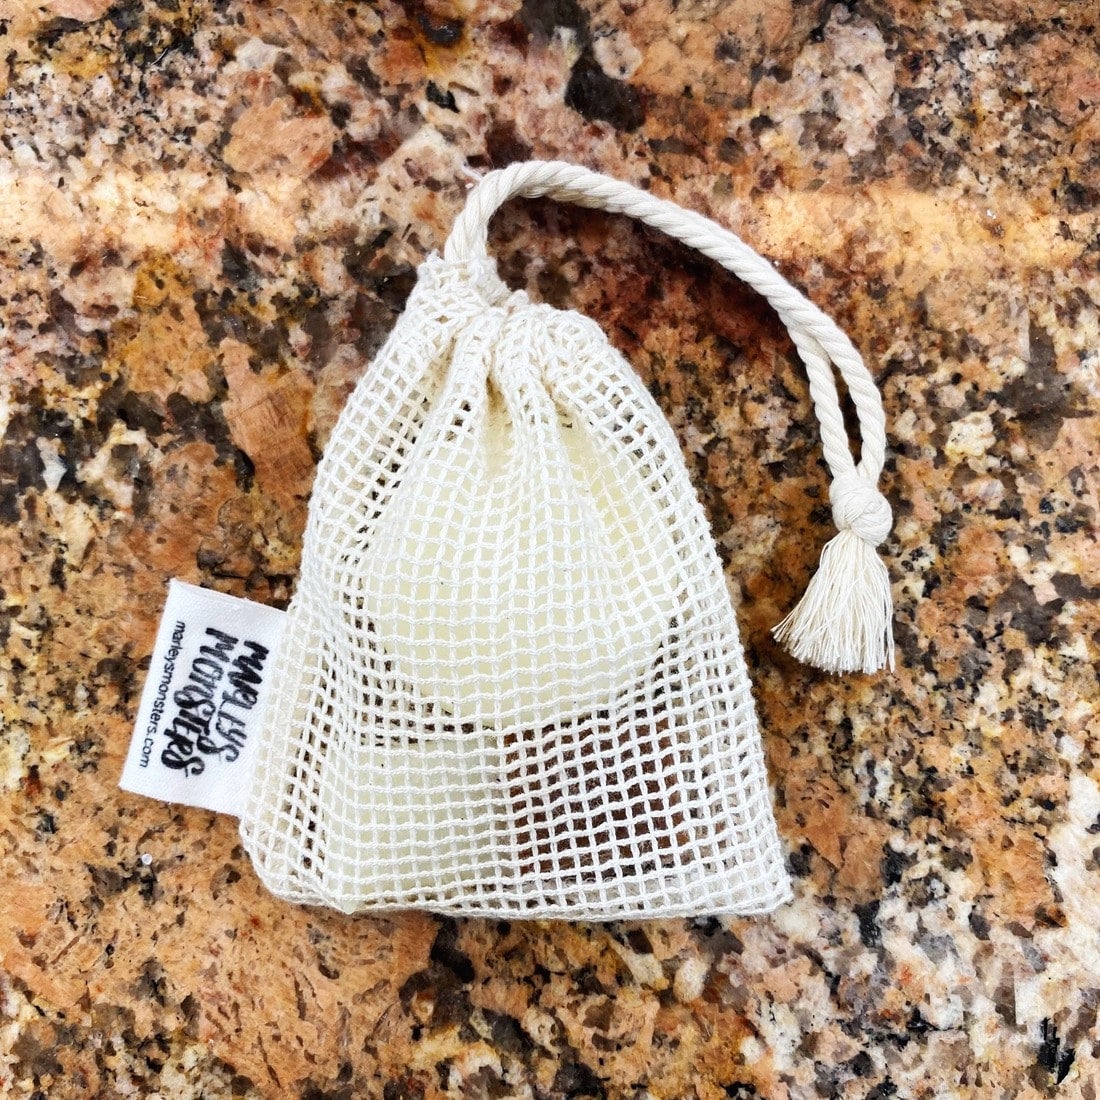 Marley's Monsters Mesh Laundry Bag